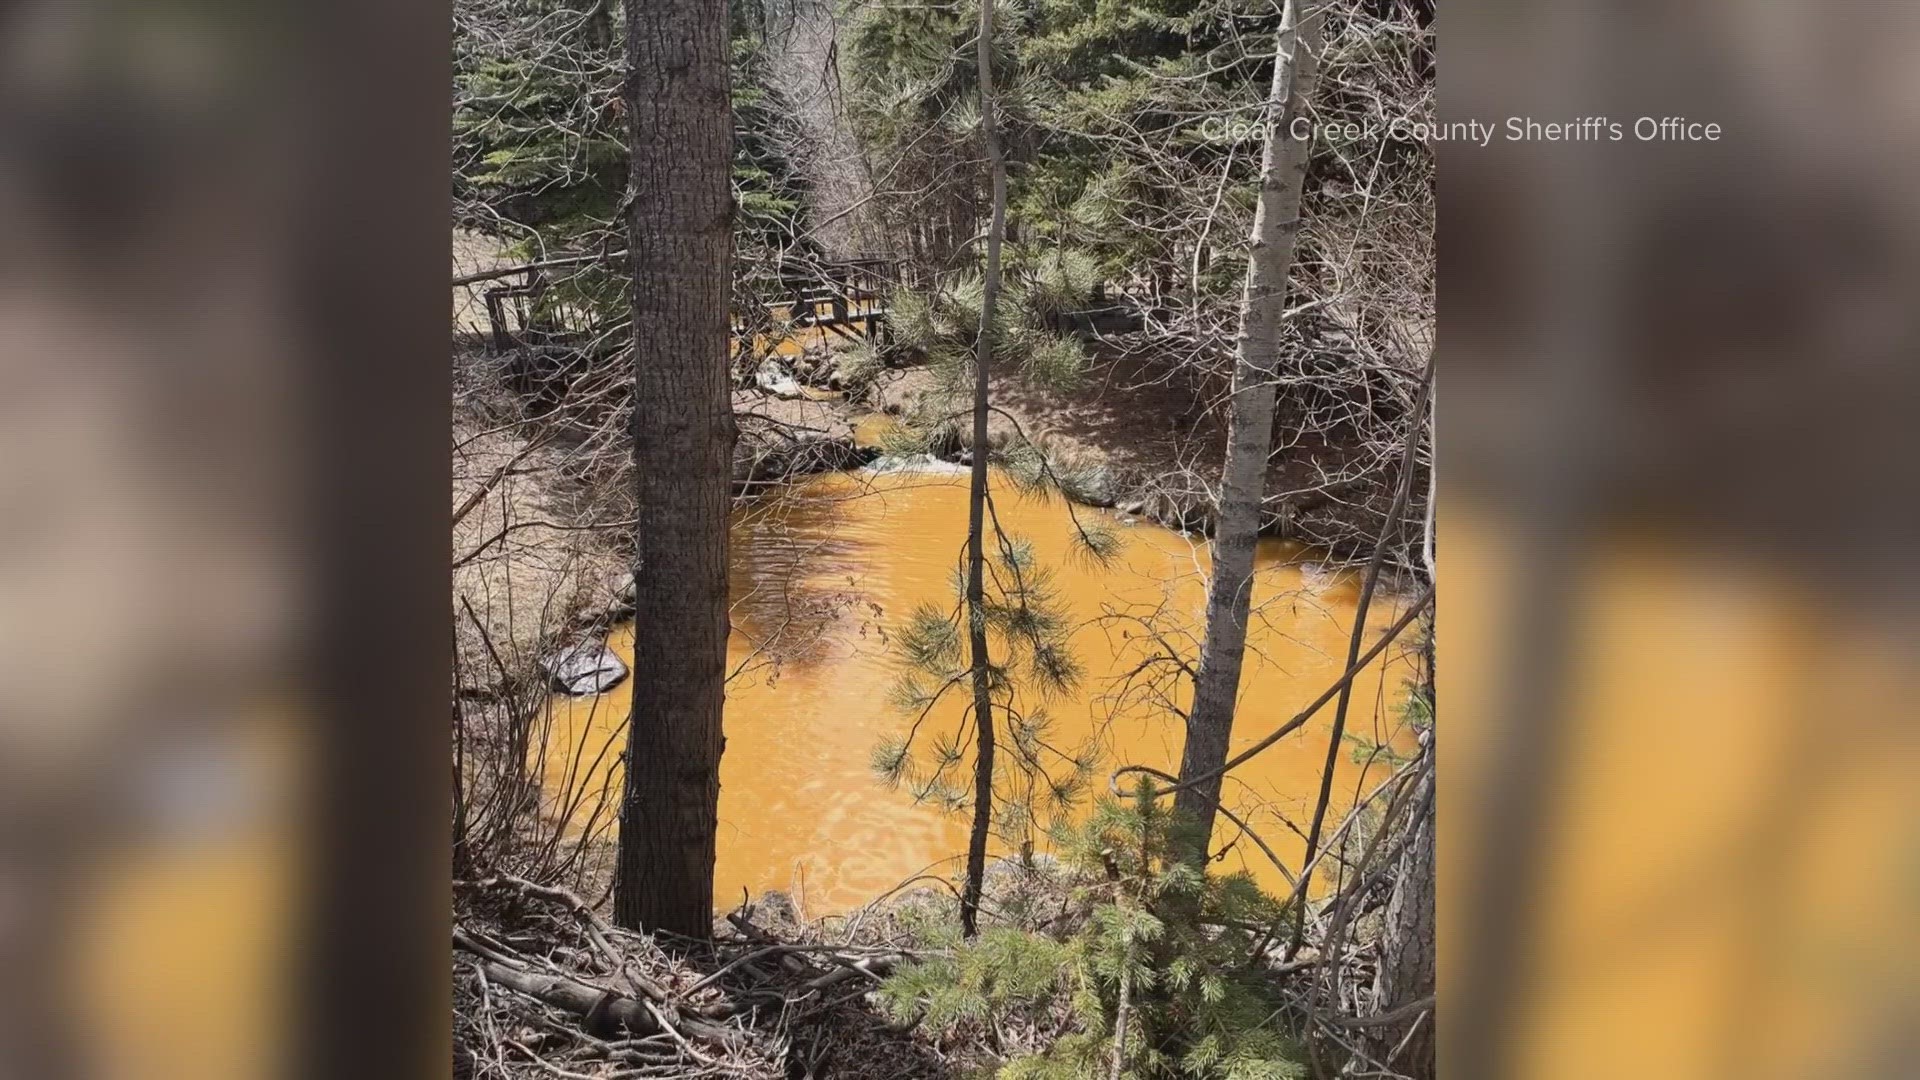 The Clear Creek Sheriff's Office said the gold-orange color was the result of a blocked sediment pond that was let loose down the creek.